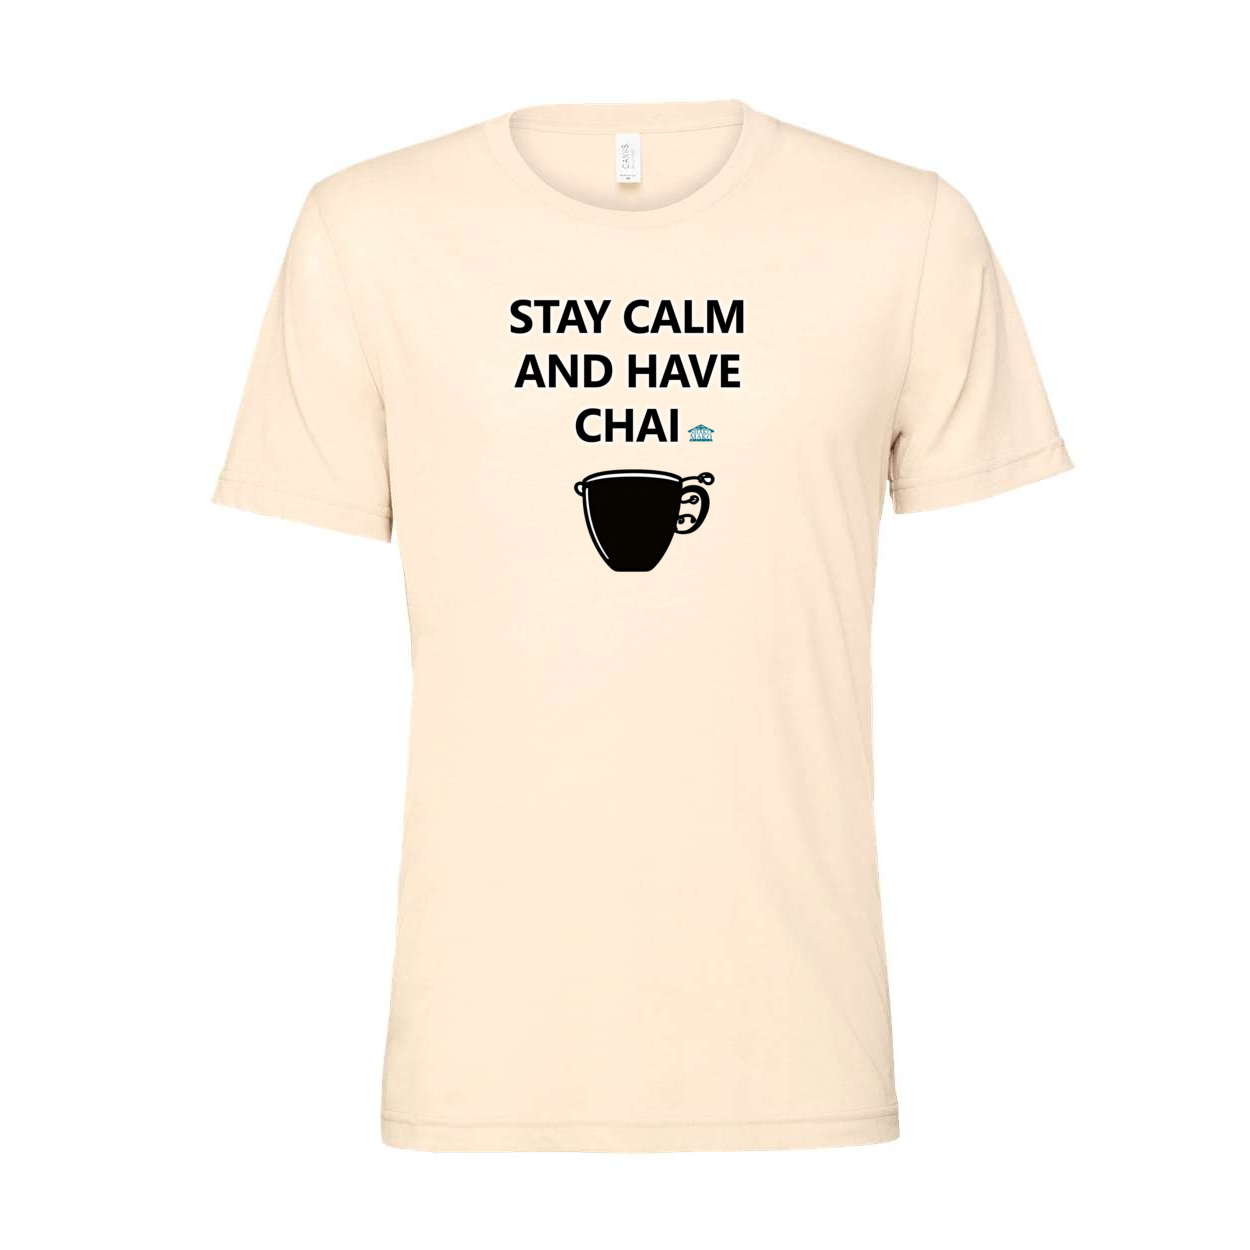 Stay Calm and have Chai